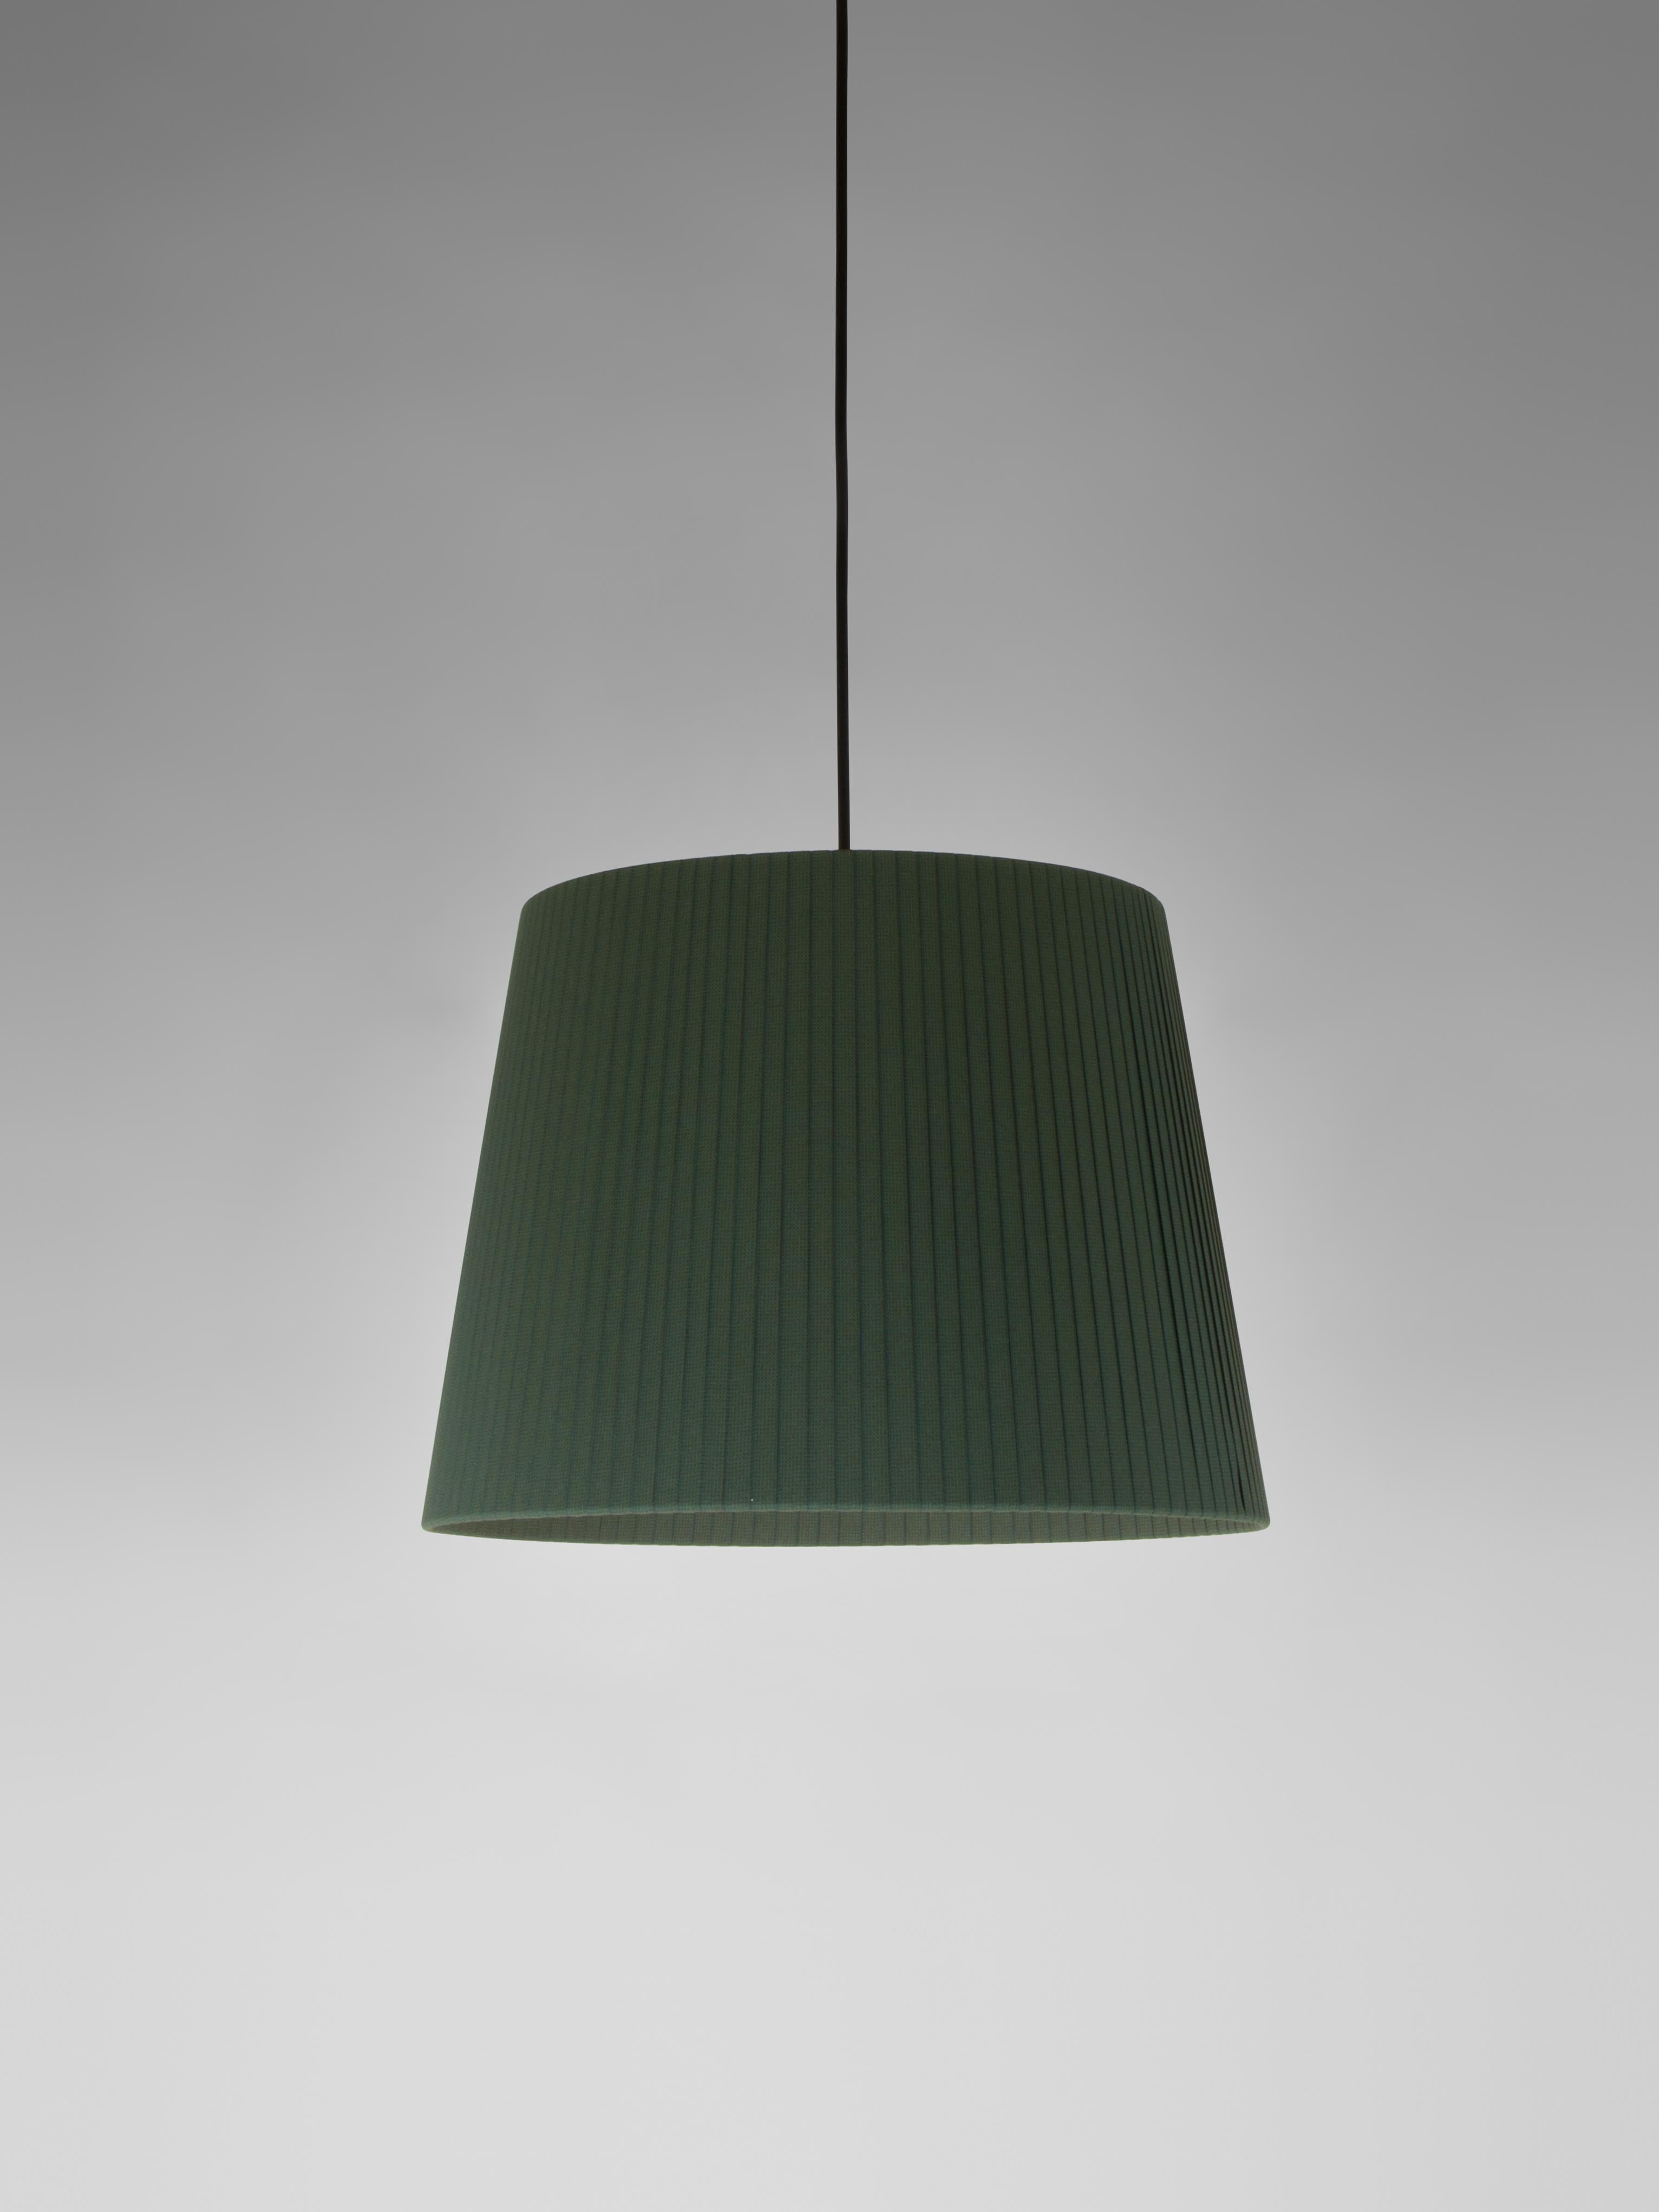 Green sísísí cónicas GT3 Pendant Lamp by Santa & Cole
Dimensions: D 36 x H 27 cm
Materials: Metal, ribbon.
Available in other colors.

The conical shape group has multiple finishes and sizes. It consists of four sizes: PT1, MT1, GT1 and GT3,